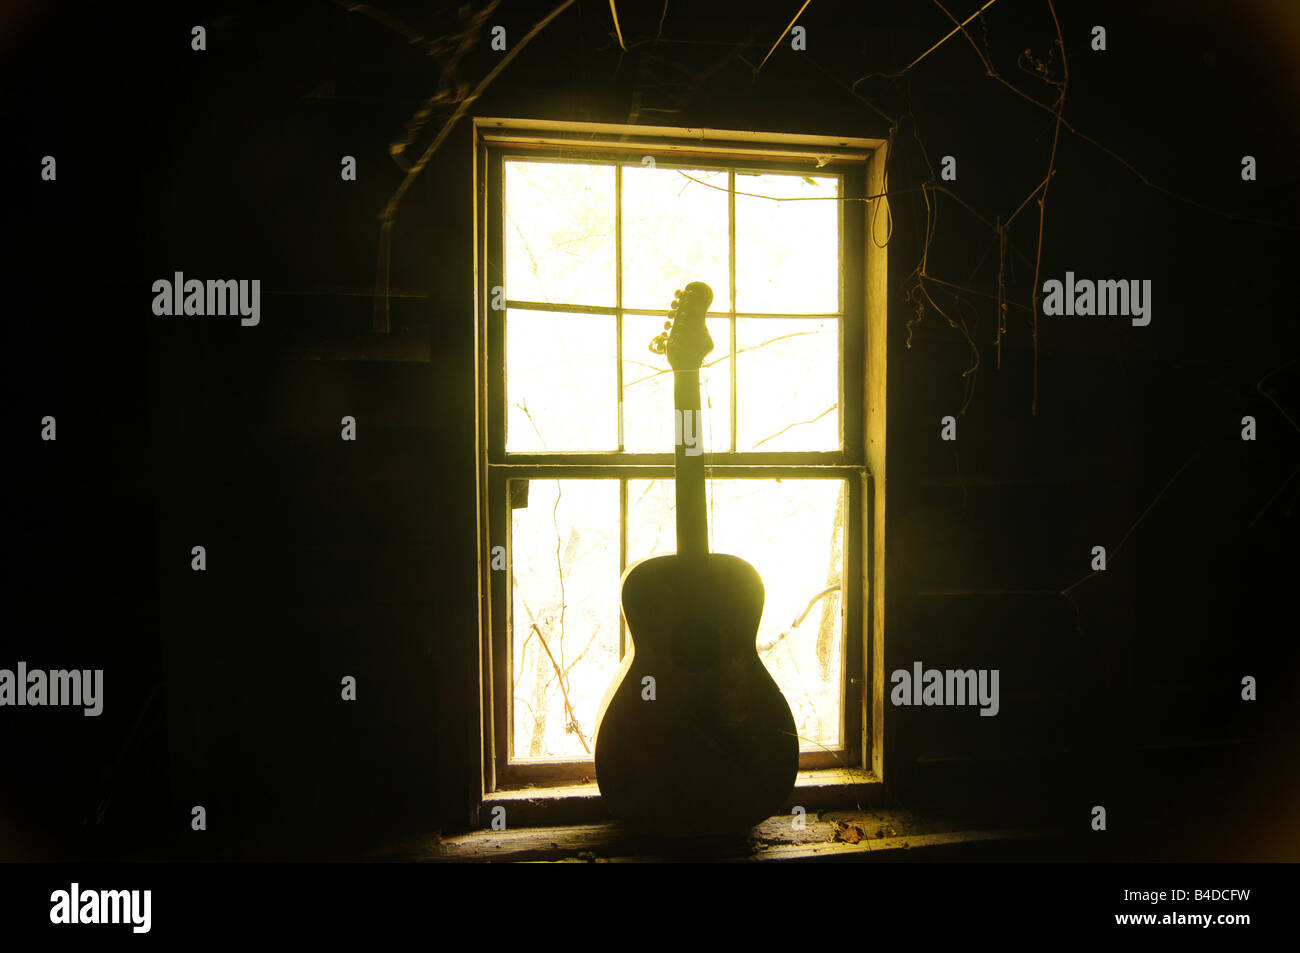 Old guitar silhouette in window Stock Photo